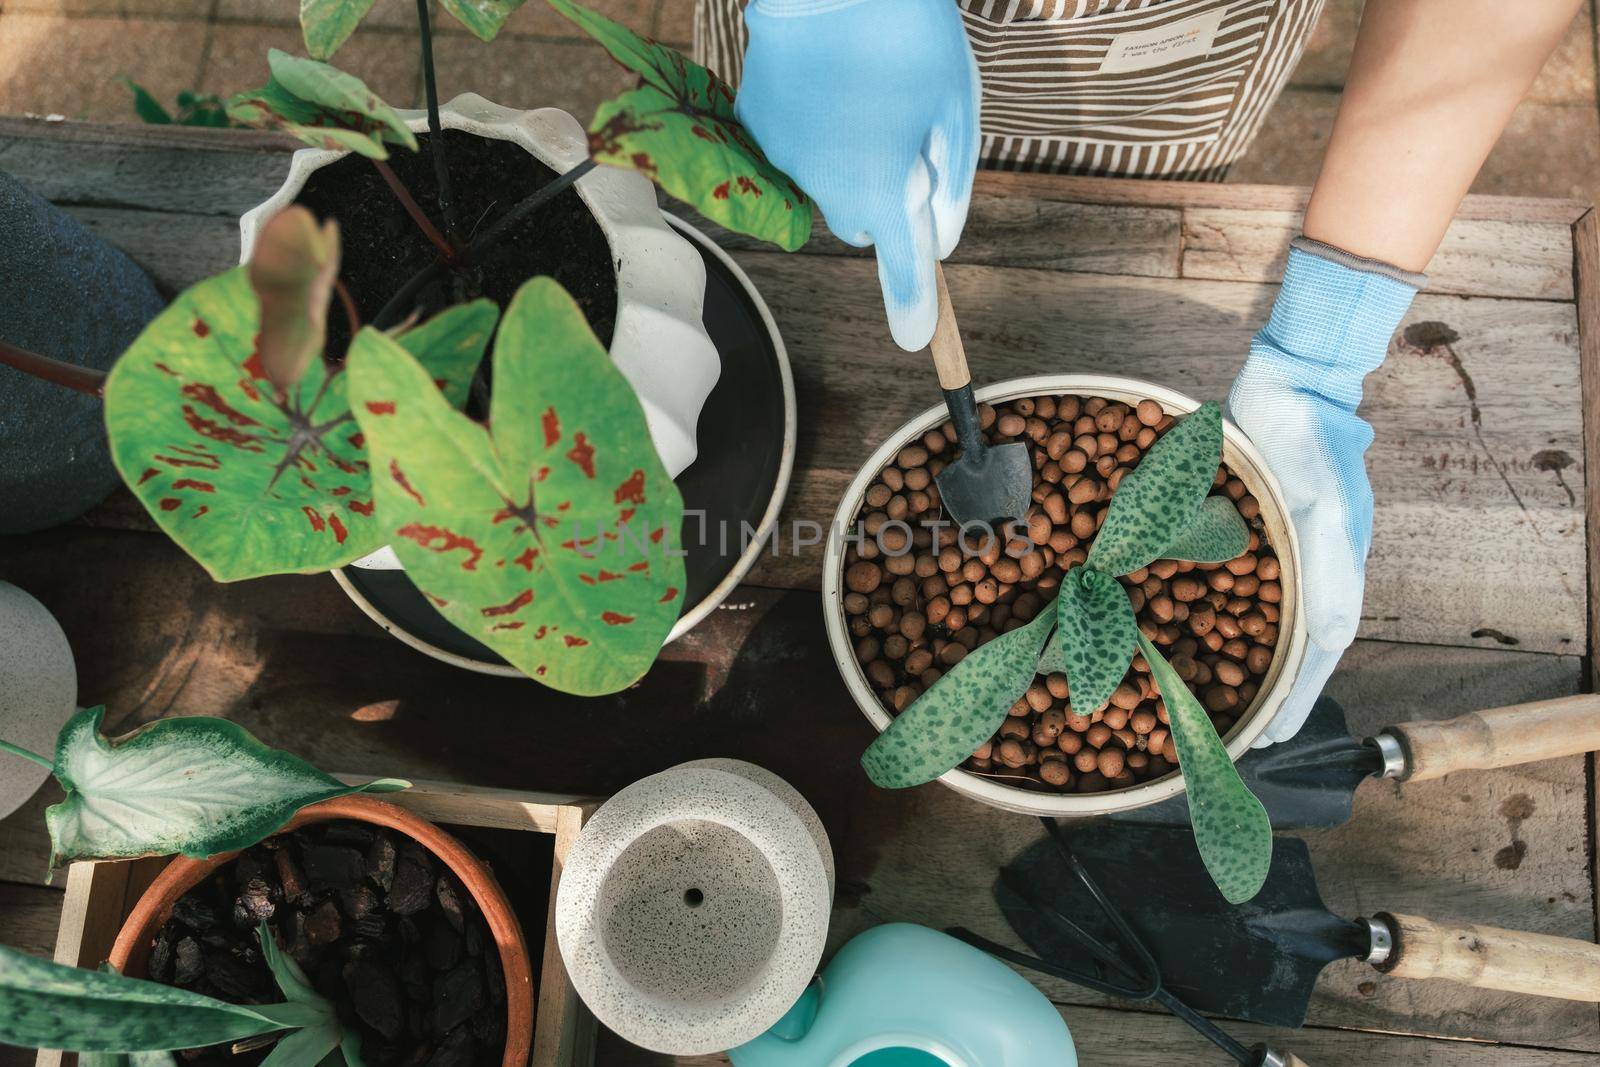 Woman gardeners transplanting plant in ceramic pots on the design wooden table. Concept of home garden. Spring time. Stylish interior with a lot of plants. Taking care of home plants. Template.